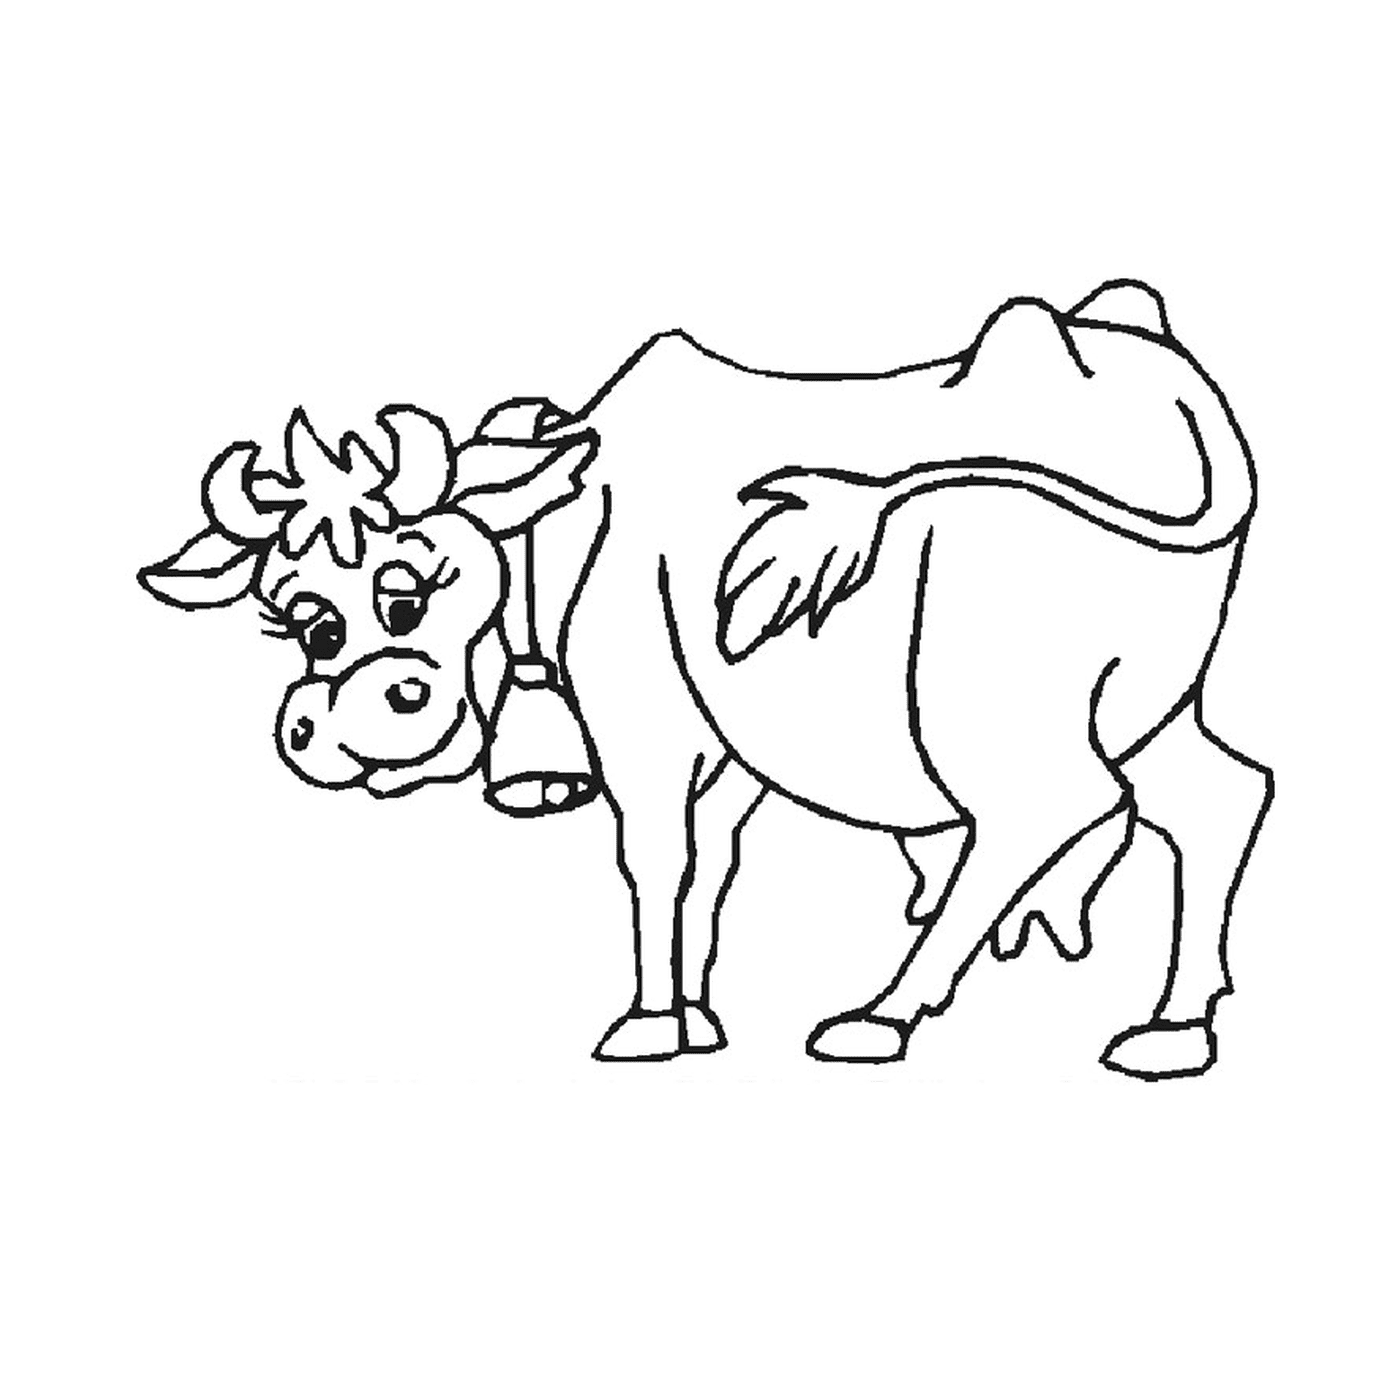  A cow standing up 